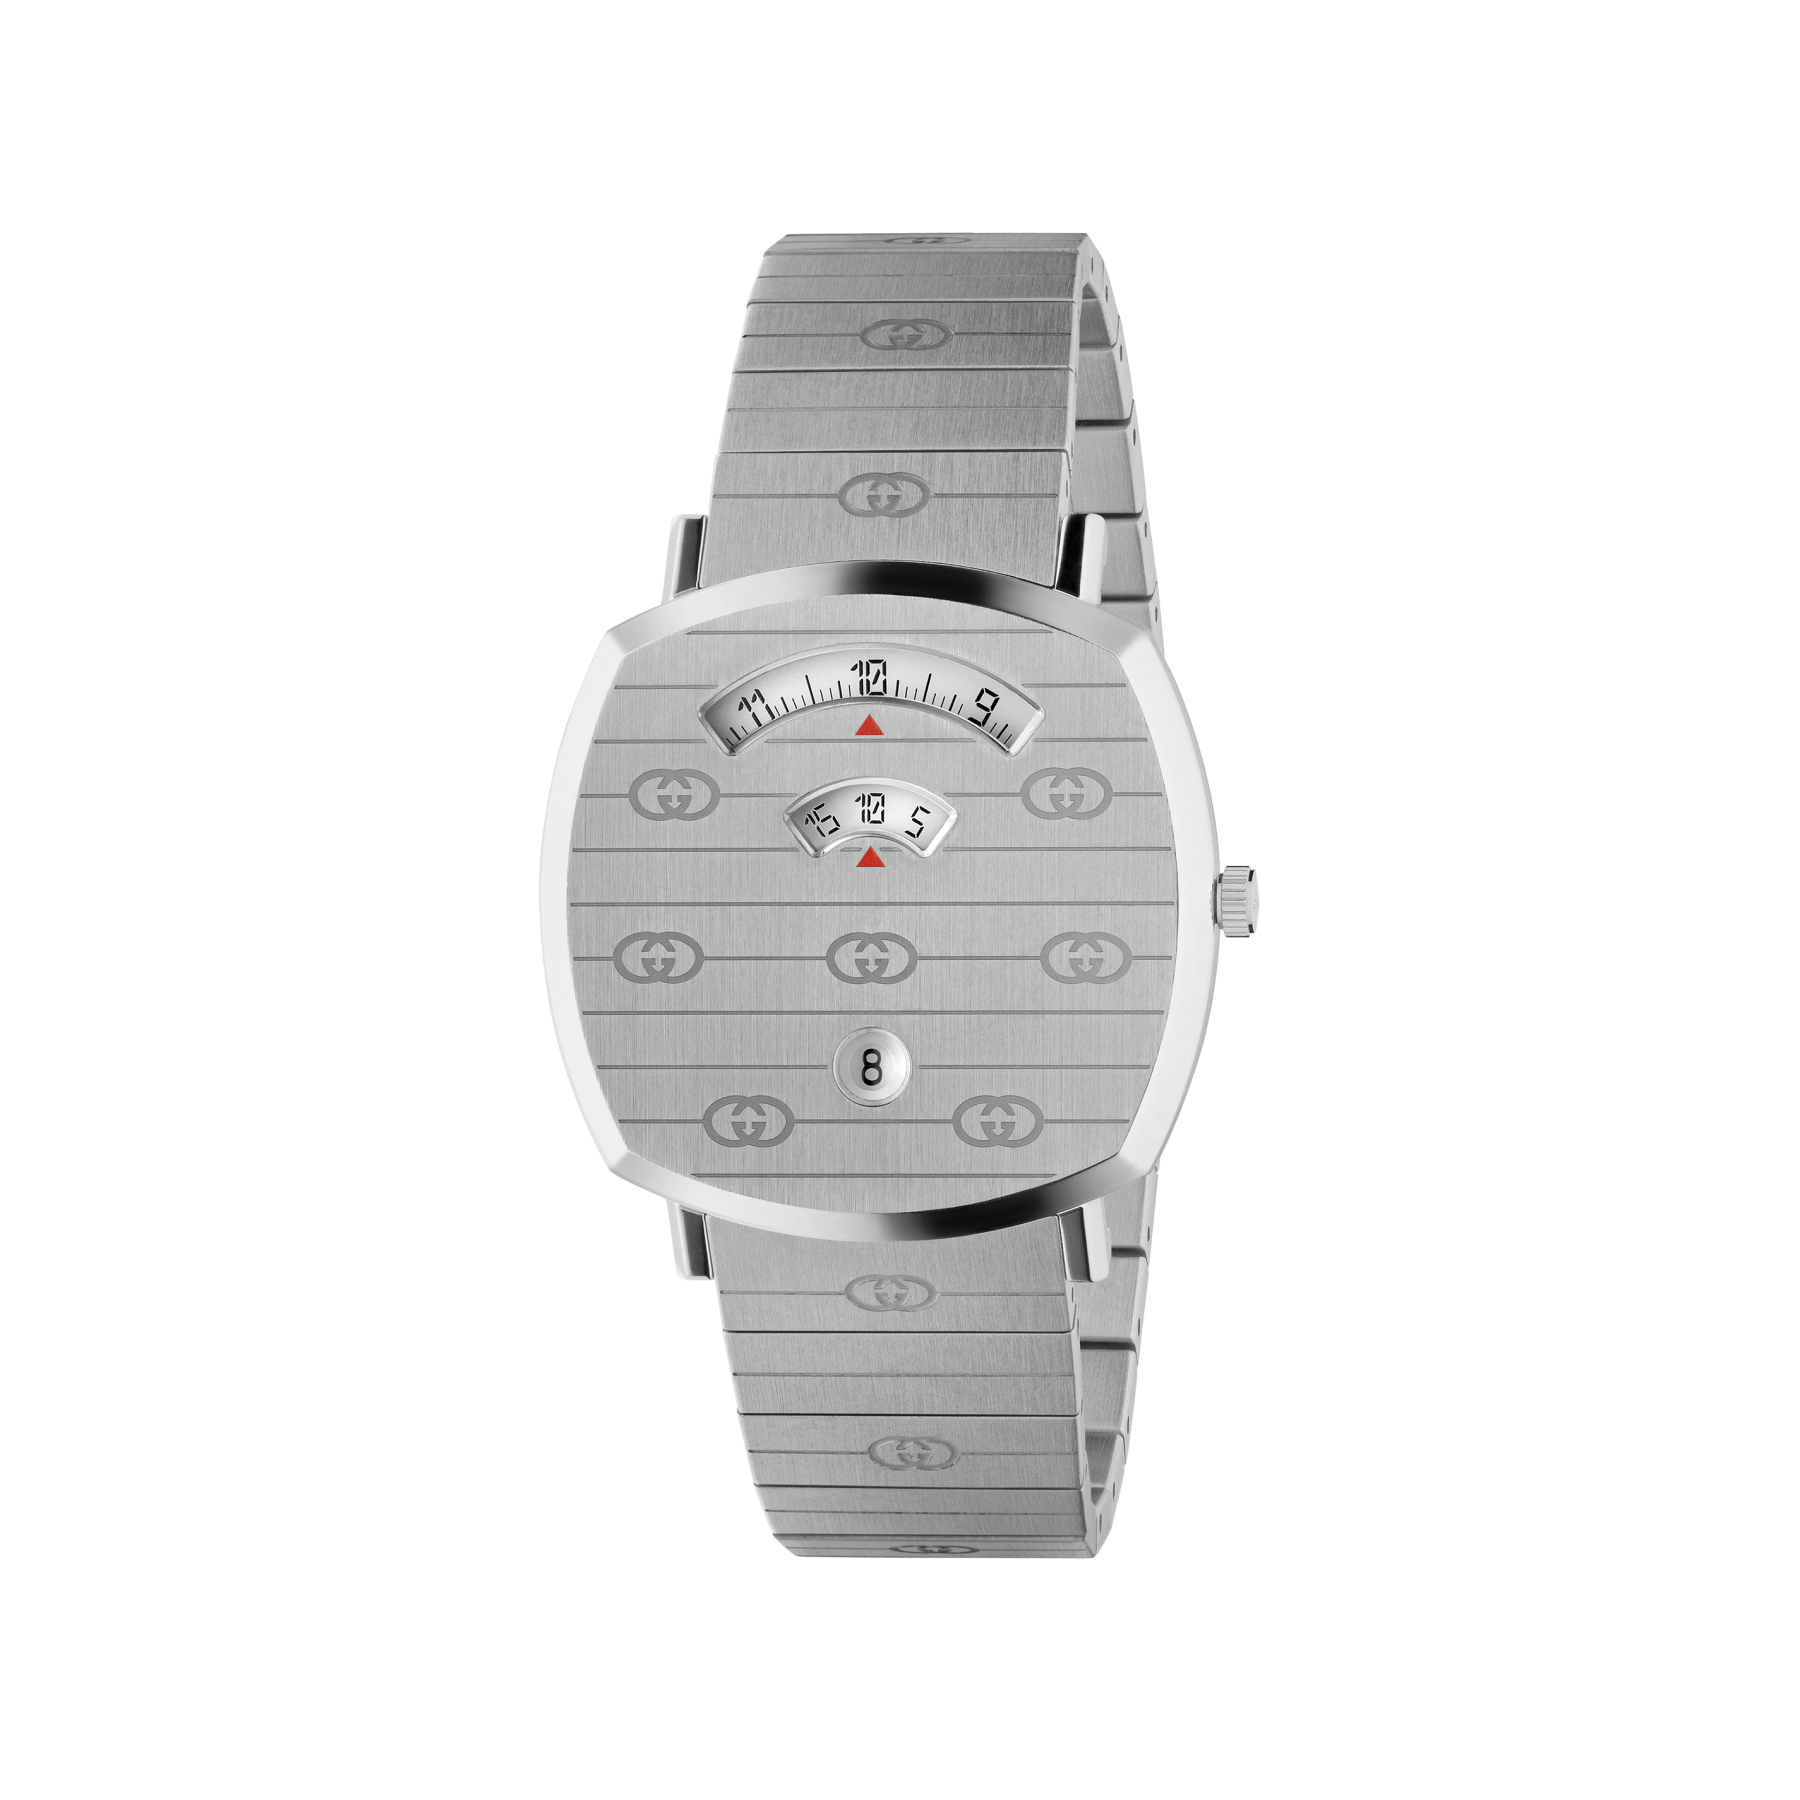 Gucci Grip Stainless Steel Watch – 38mm front view